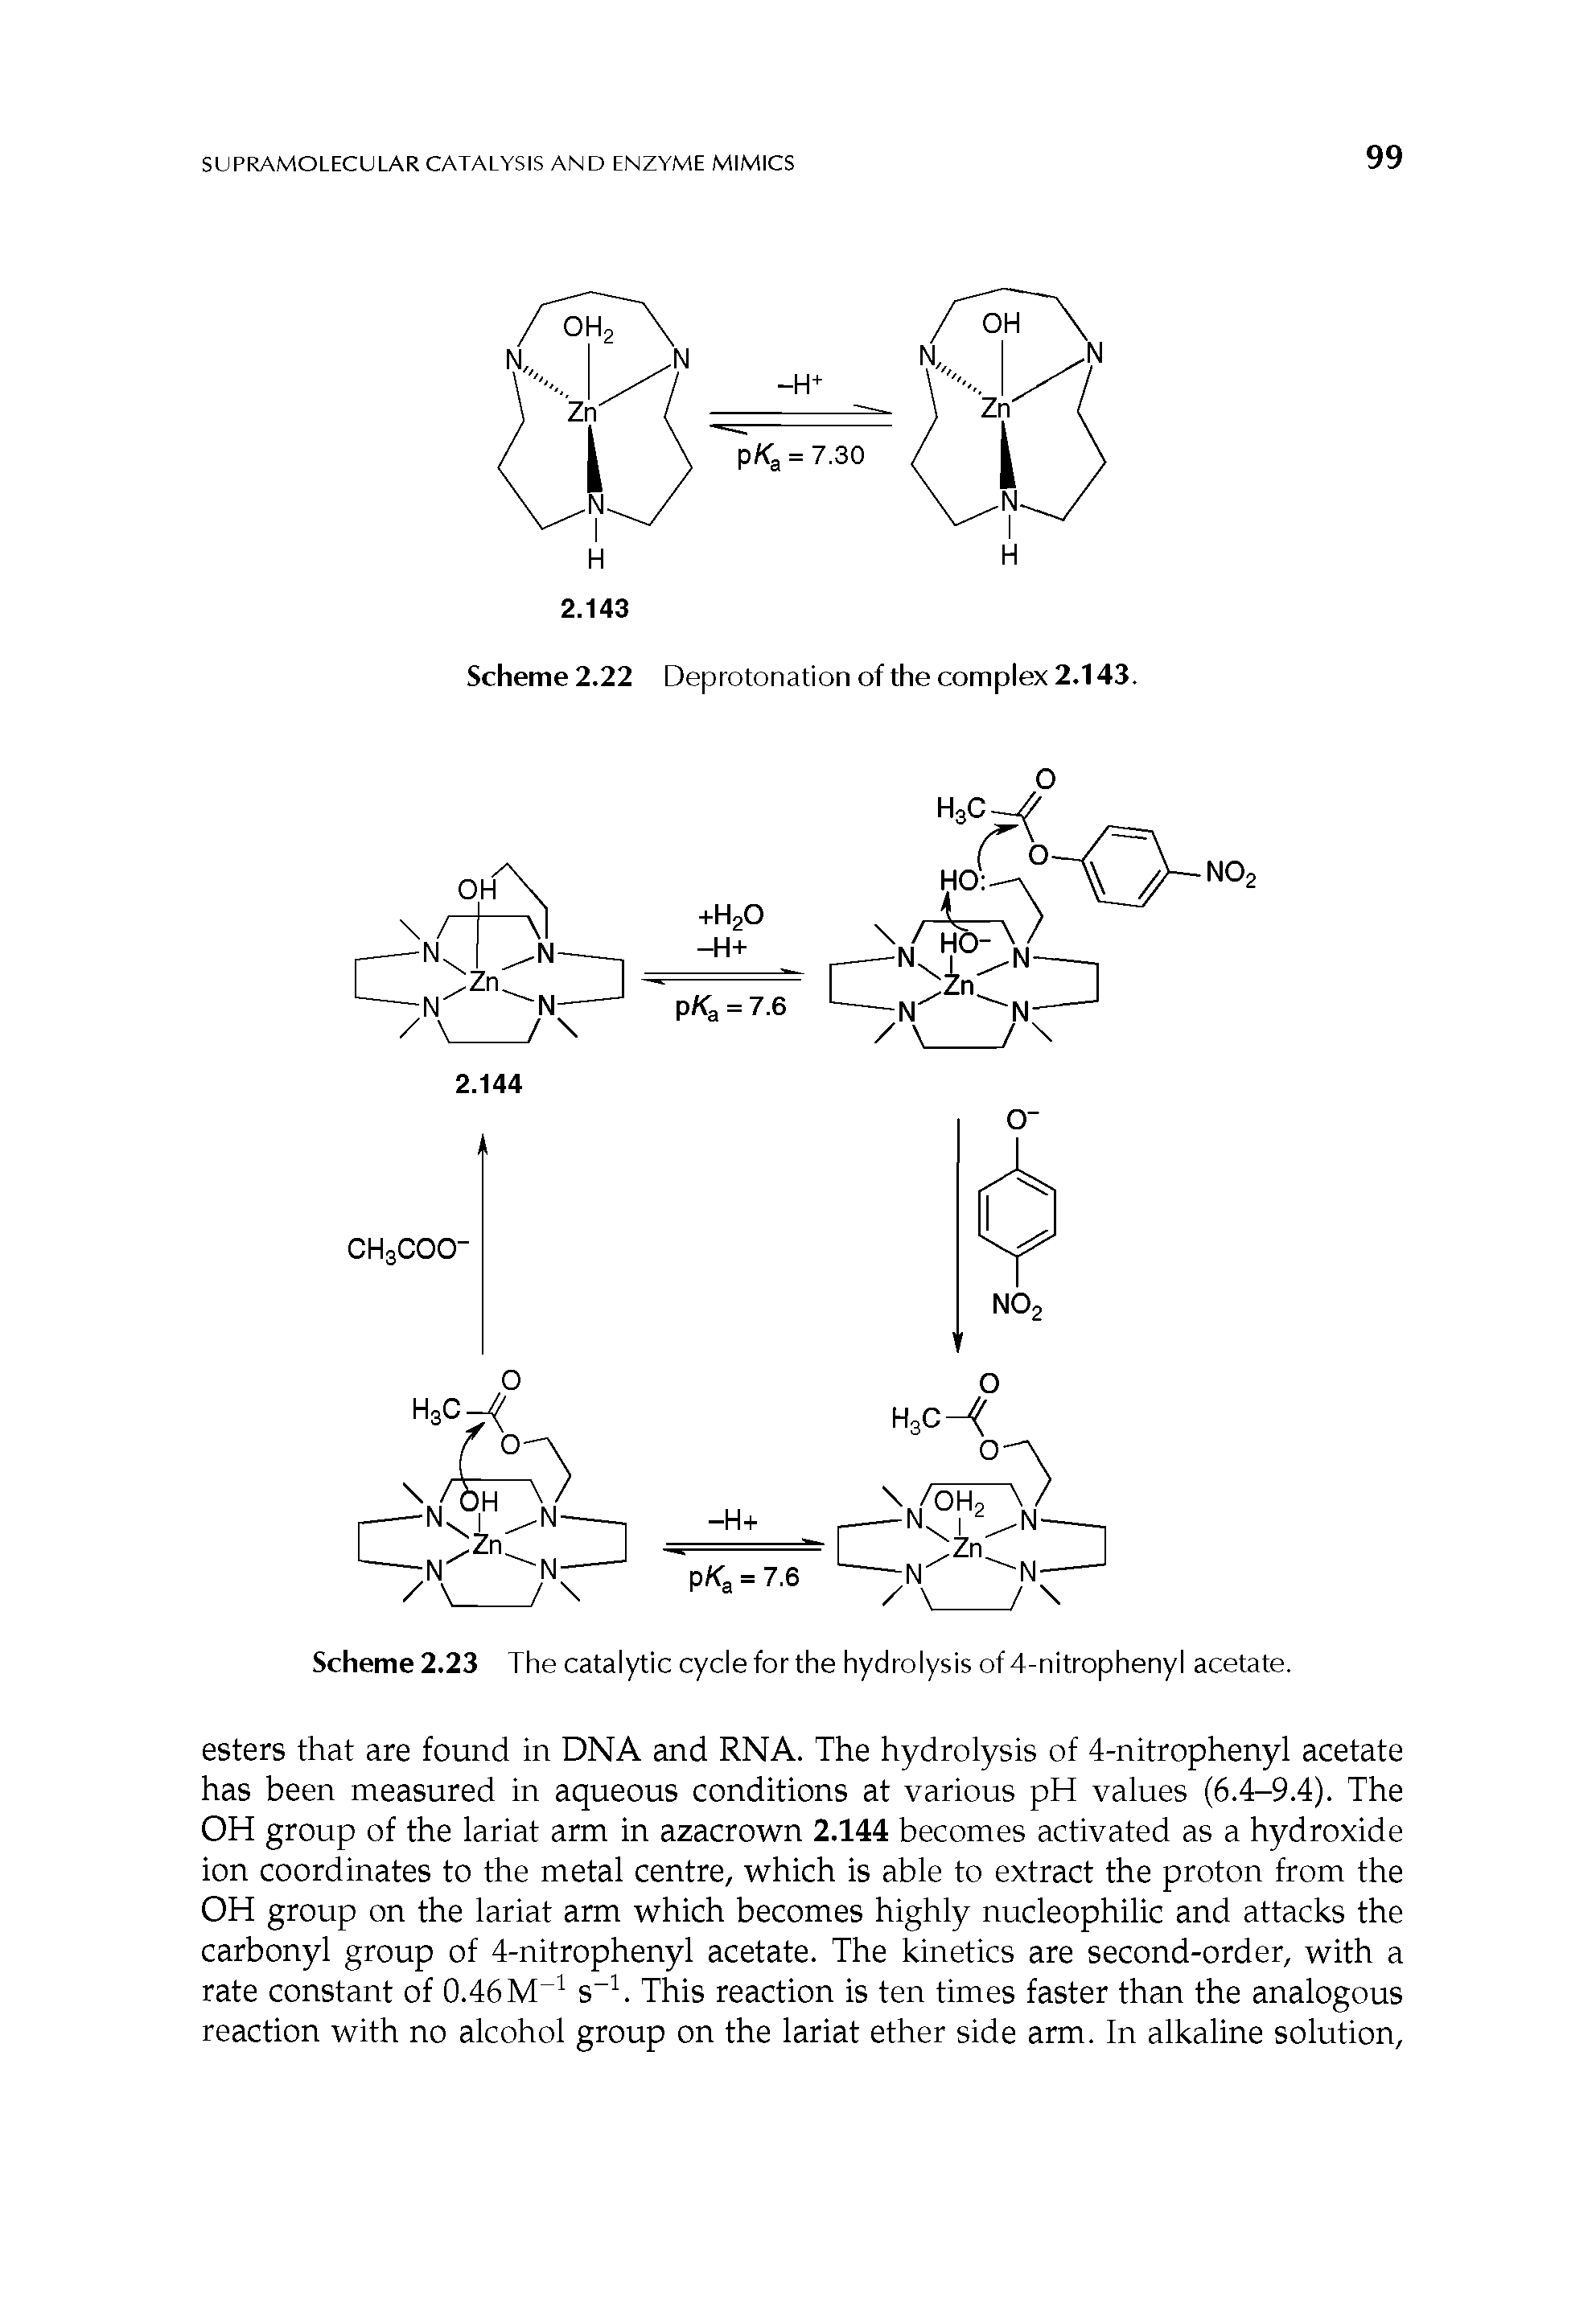 Scheme 2.23 The catalytic cycle for the hydrolysis of 4-nitrophenyl acetate.